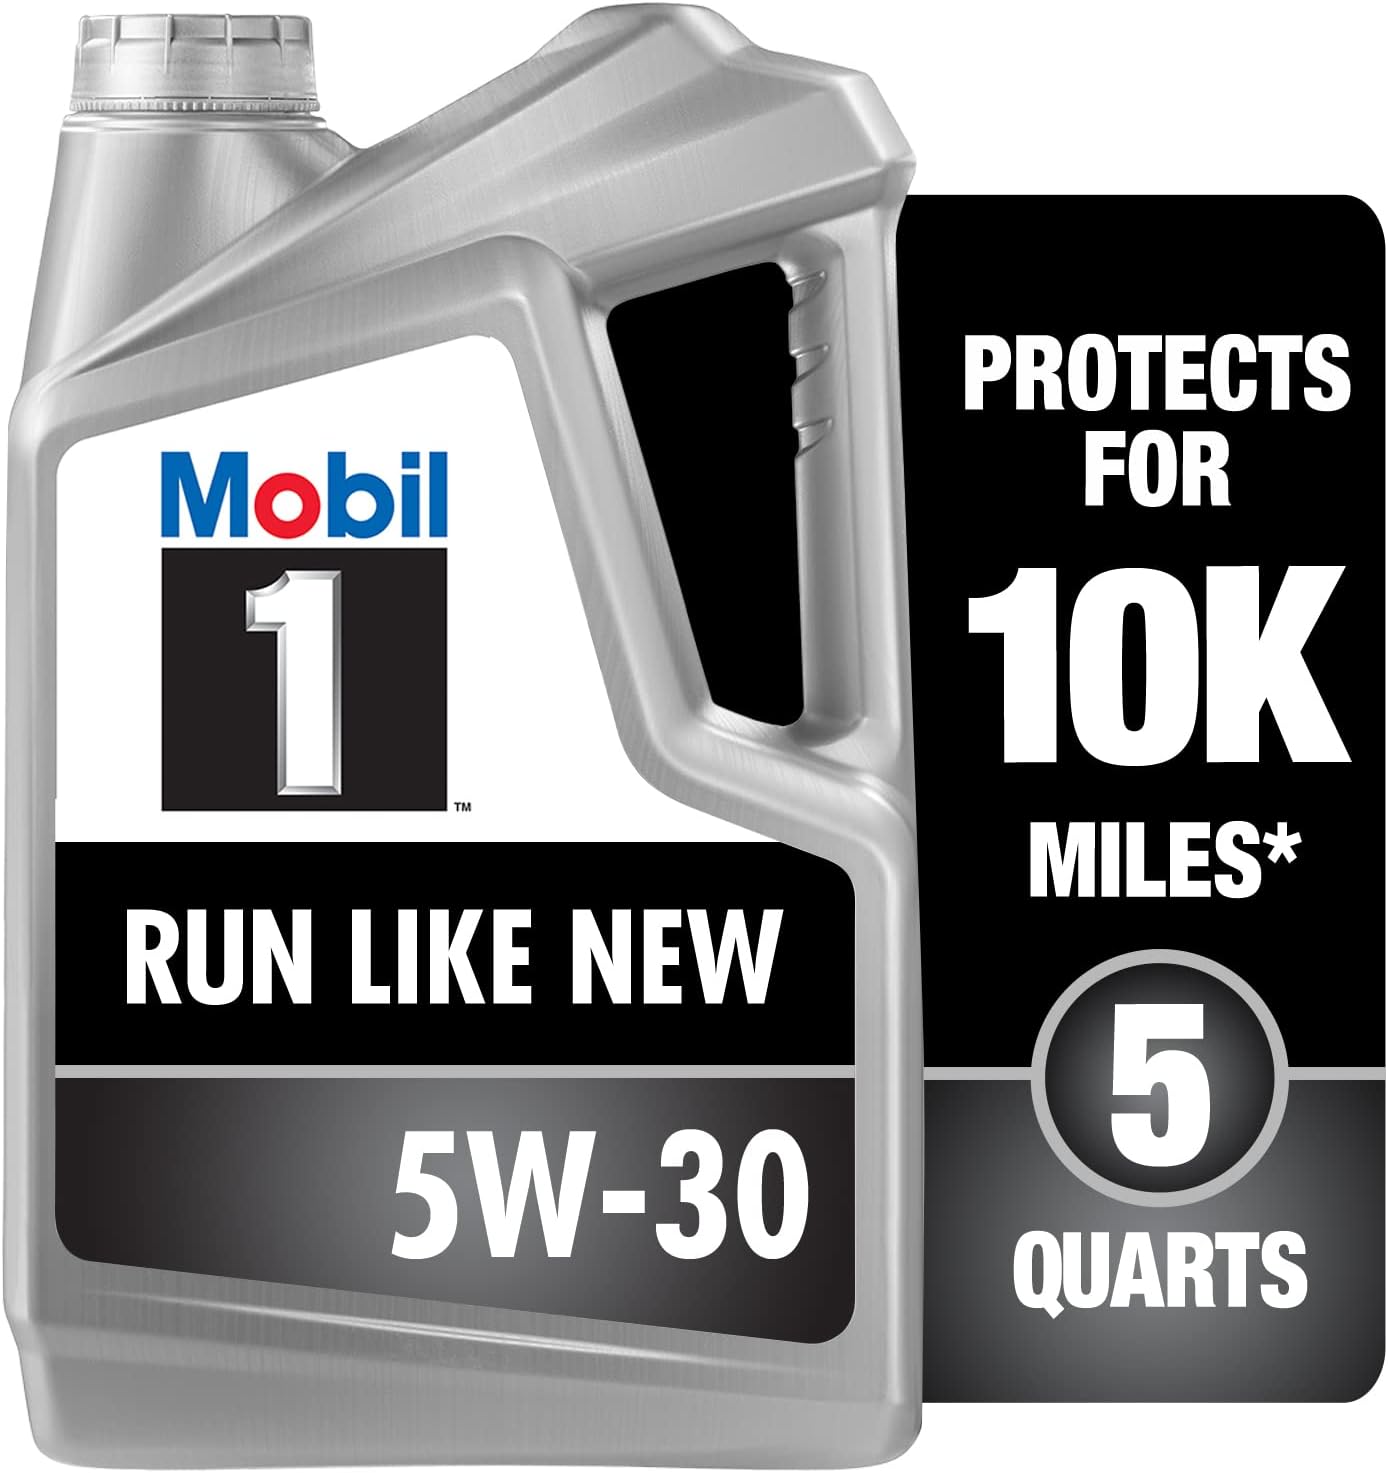 “Mobil 1 5W30 Advanced Full Synthetic Motor Oil, Review”